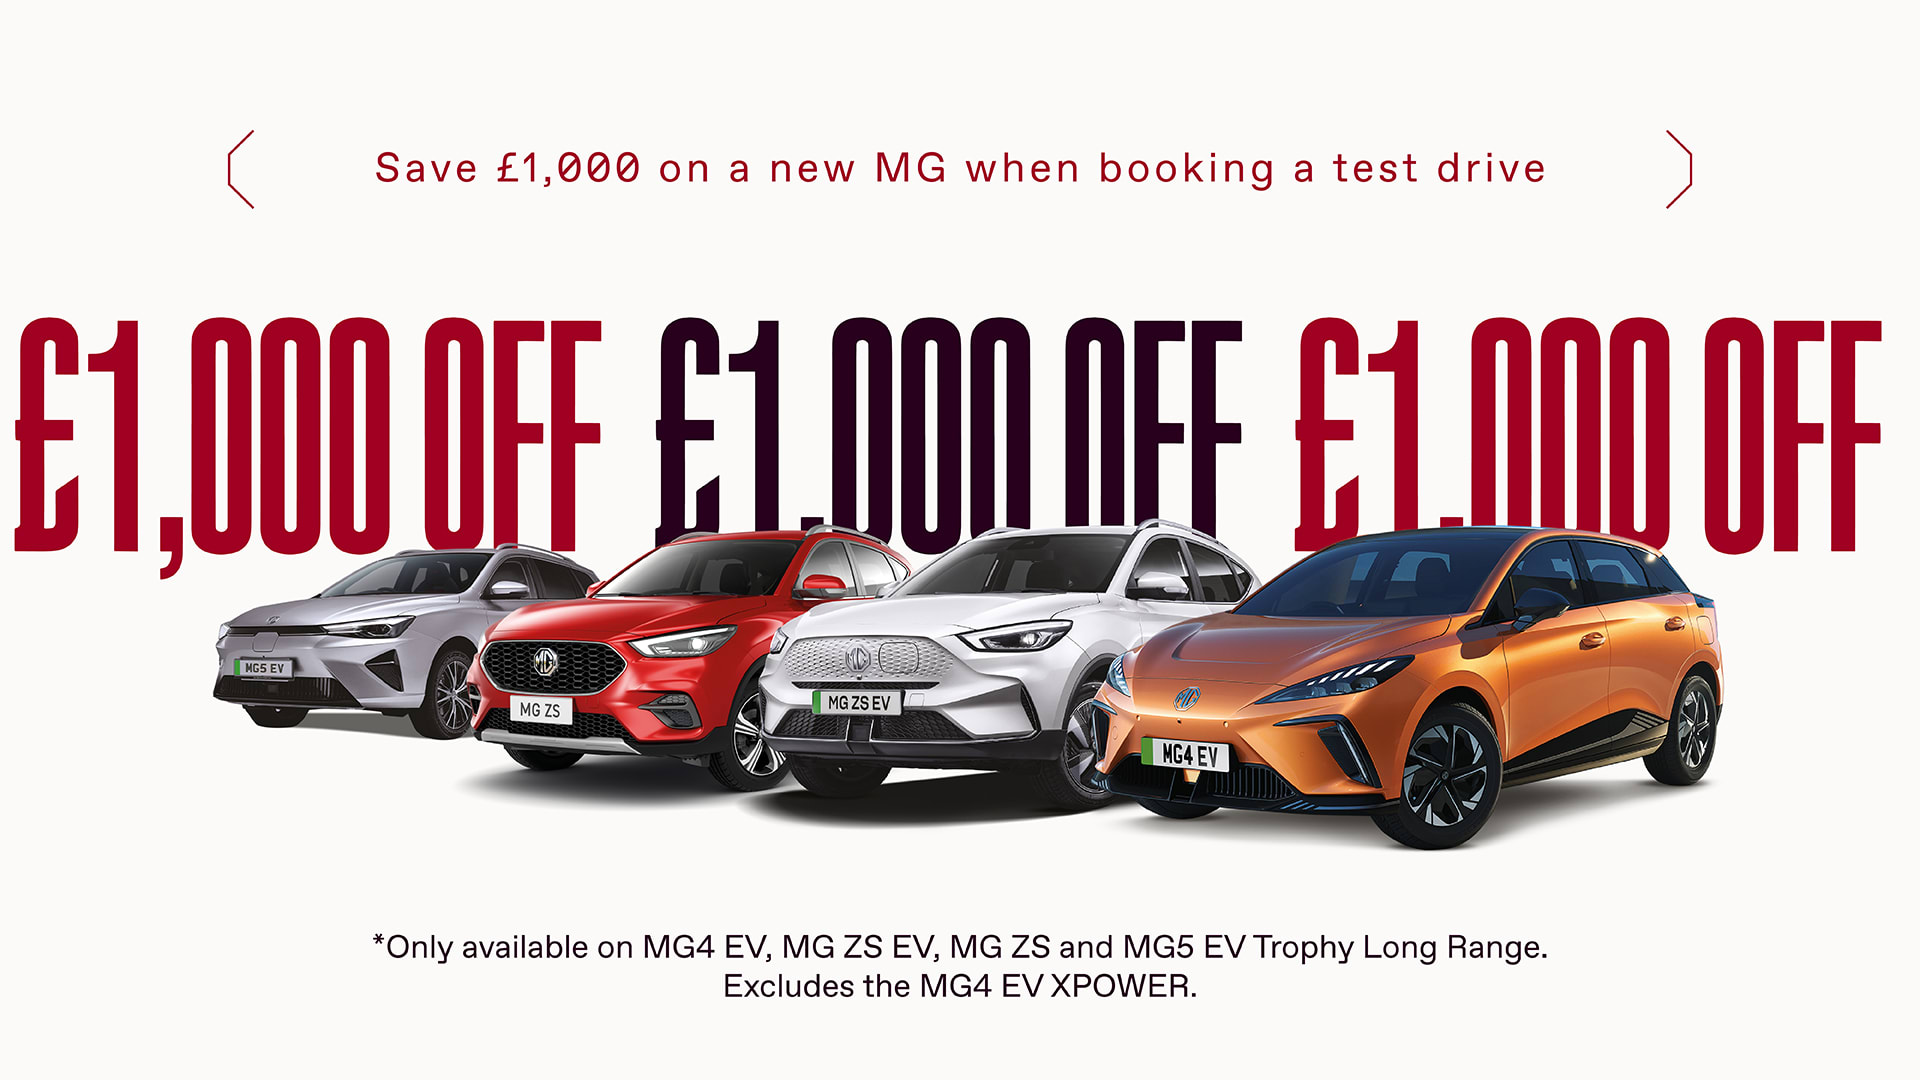 MG £1,000 Test Drive Offer